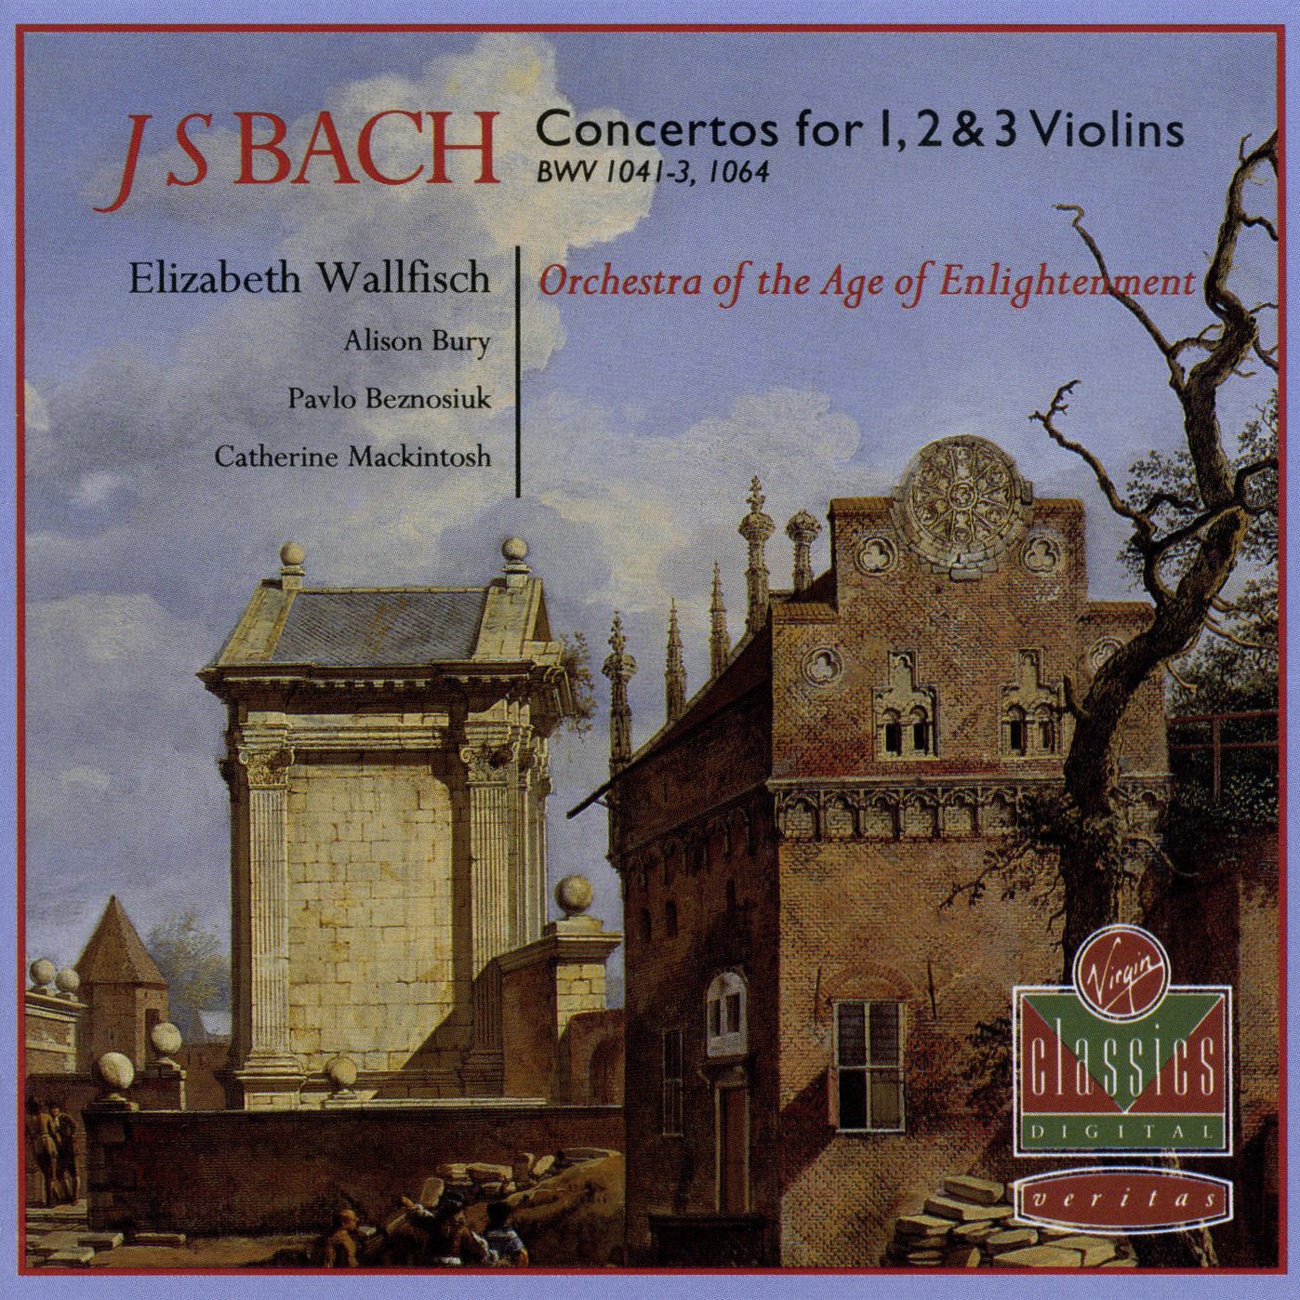 Concerto in D for 3 violins (reconstructed from Concerto for 3 harpsichords in C) BWV 1064: II.      Adagio